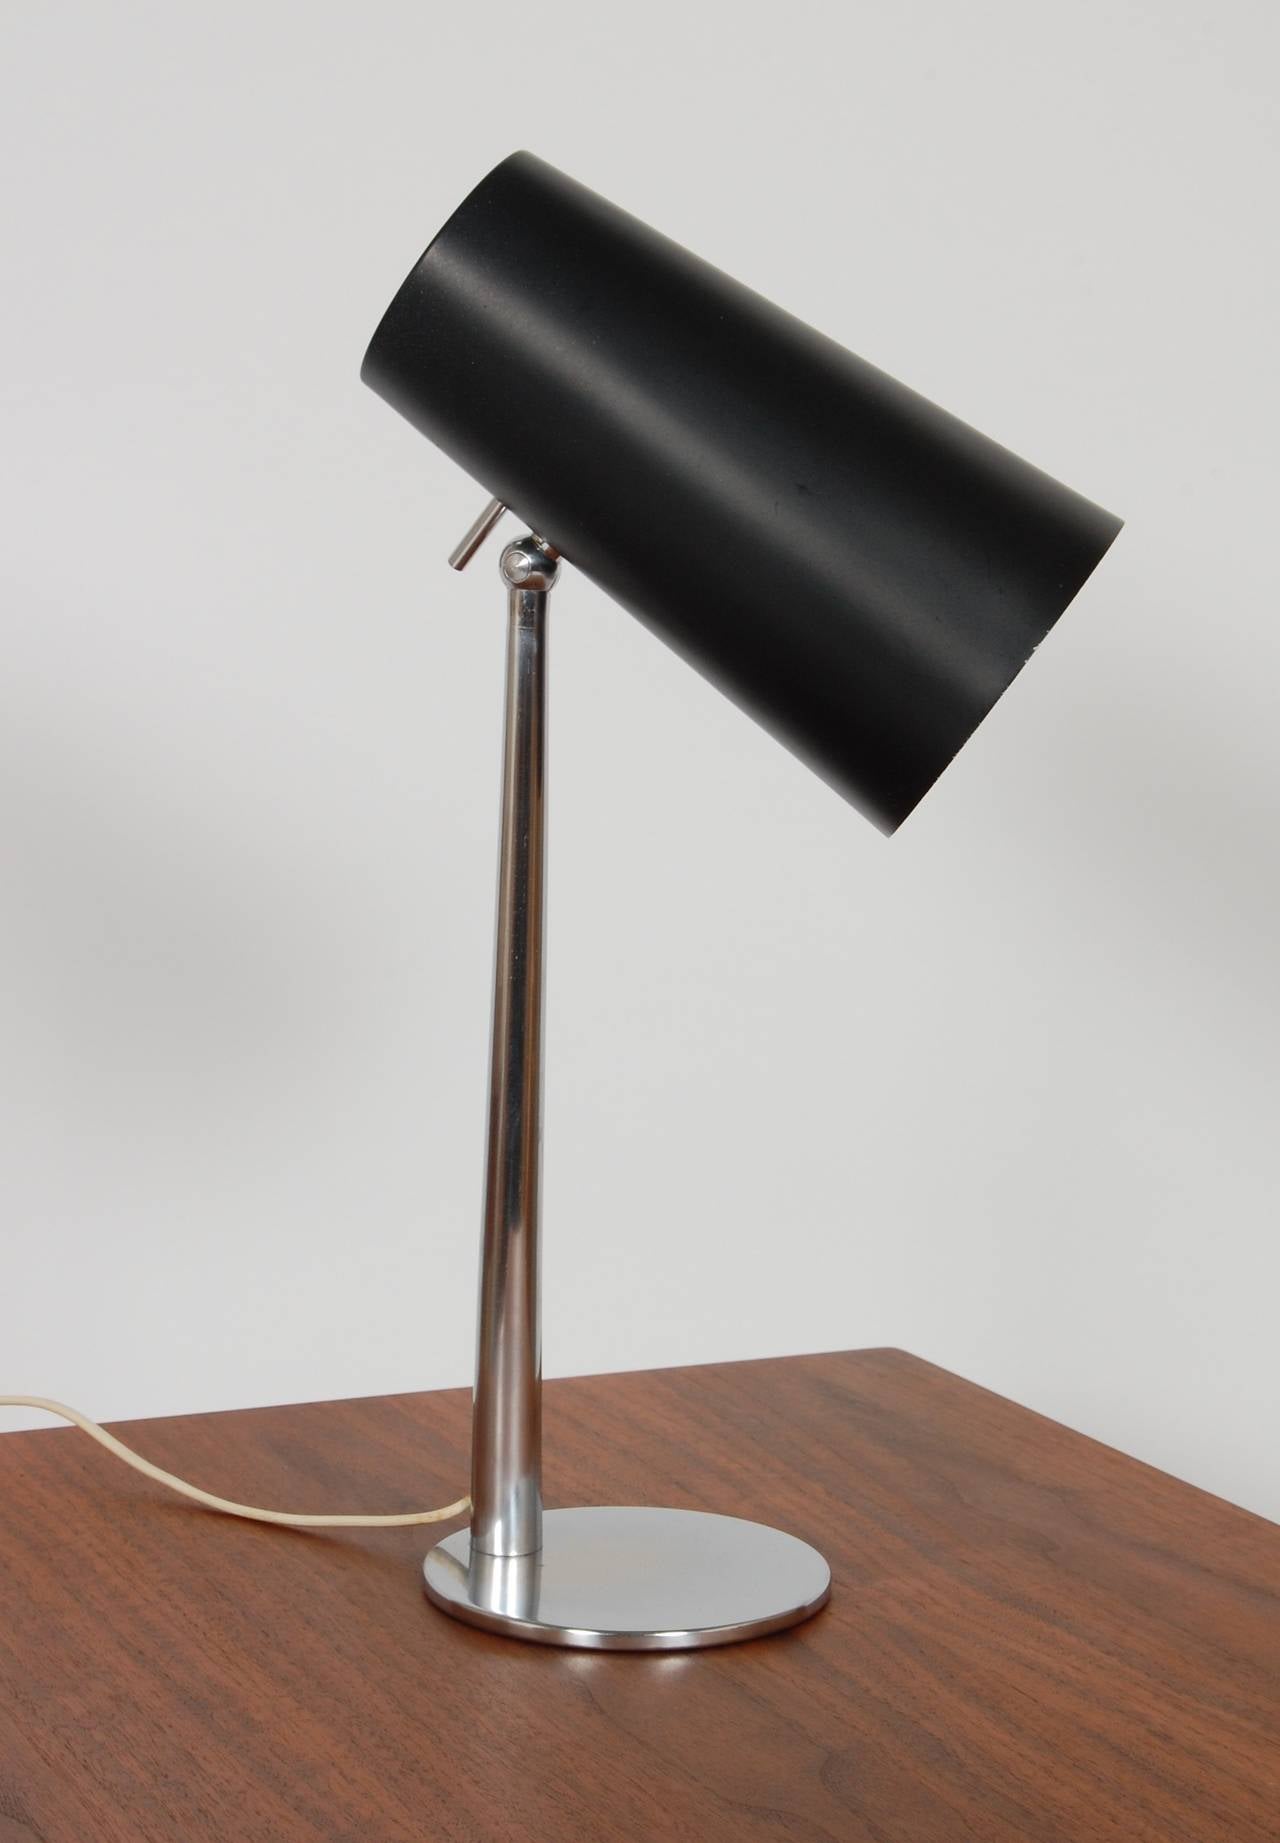 Brushed chrome base and stem with a black lacquer tapered cylinder adjustable shade. A wonderful compact design in lighting.